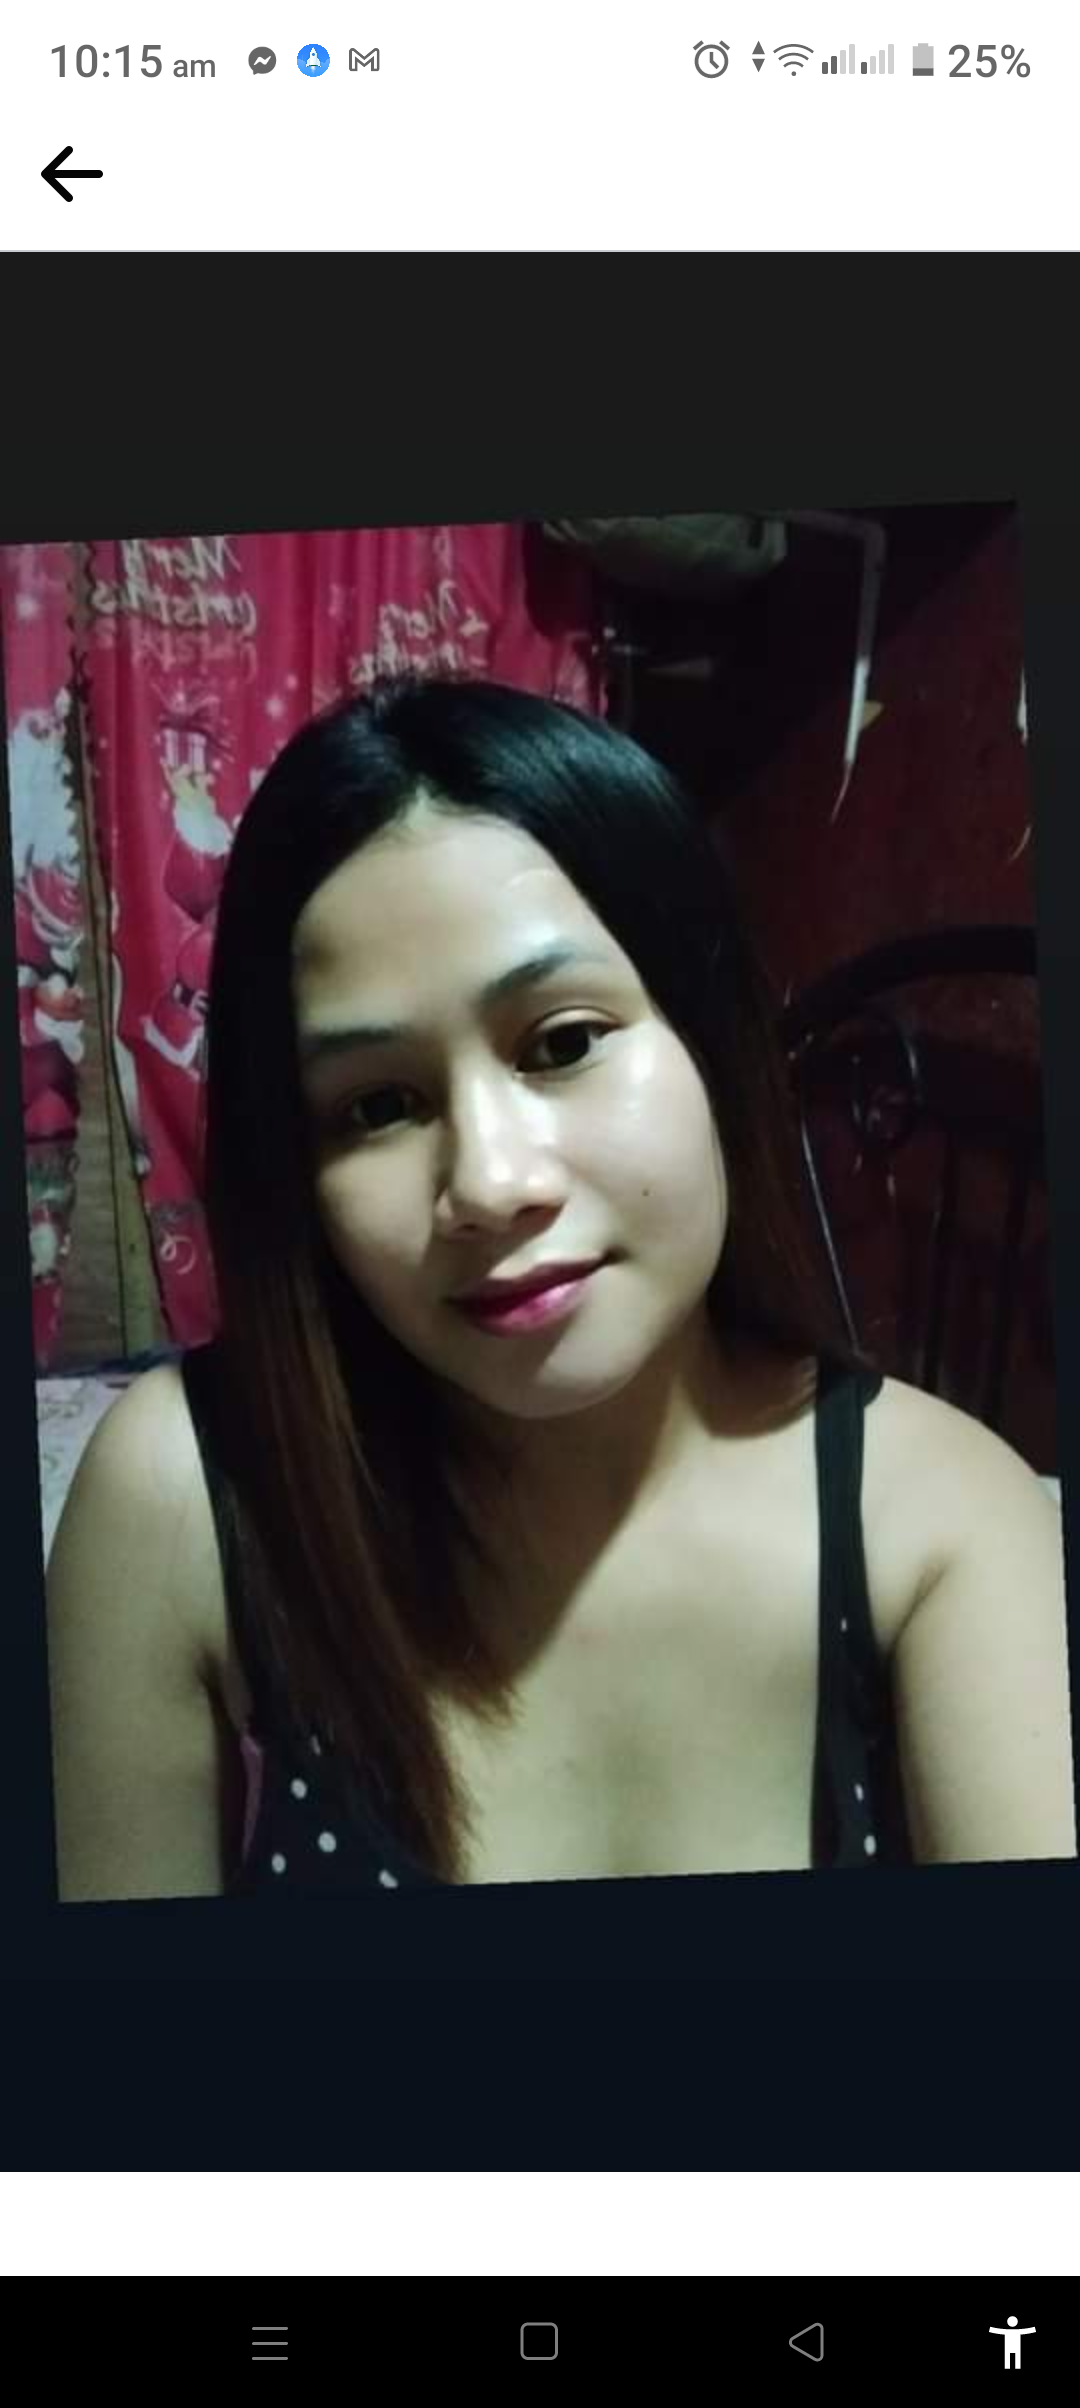  local dating sites Bacolod